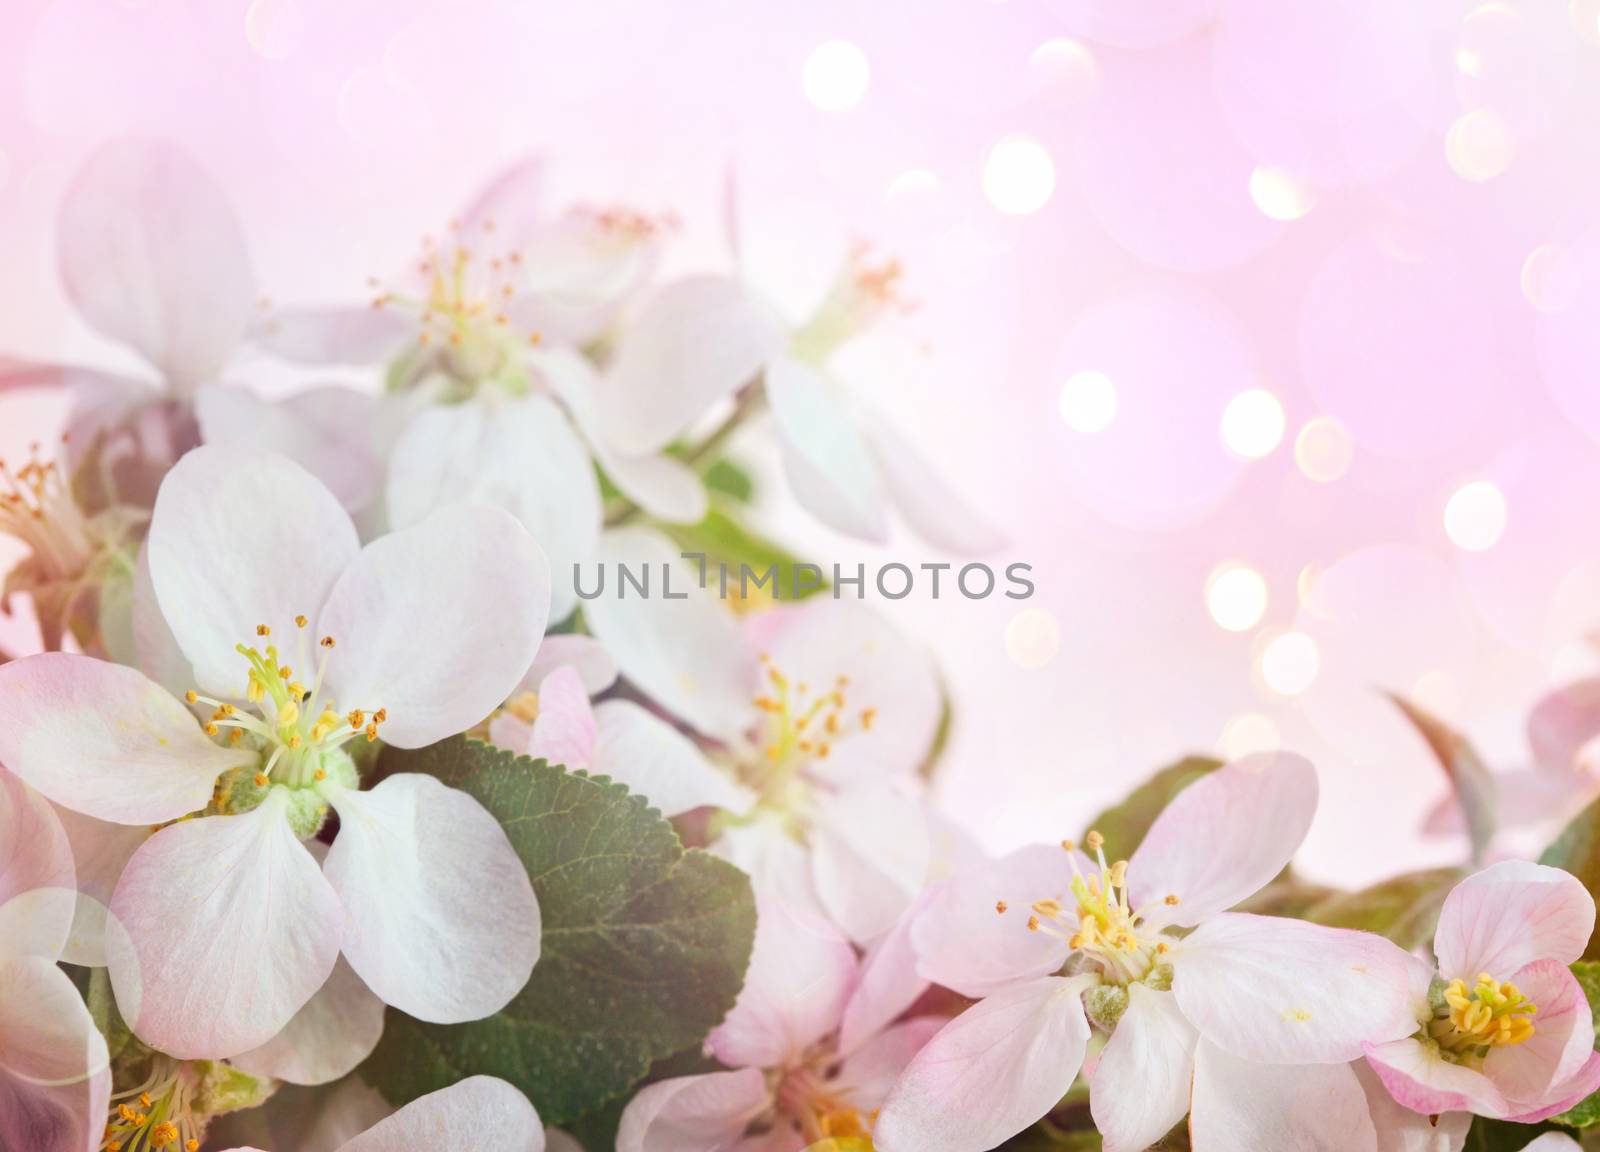 Apple blossoms against soft pink background